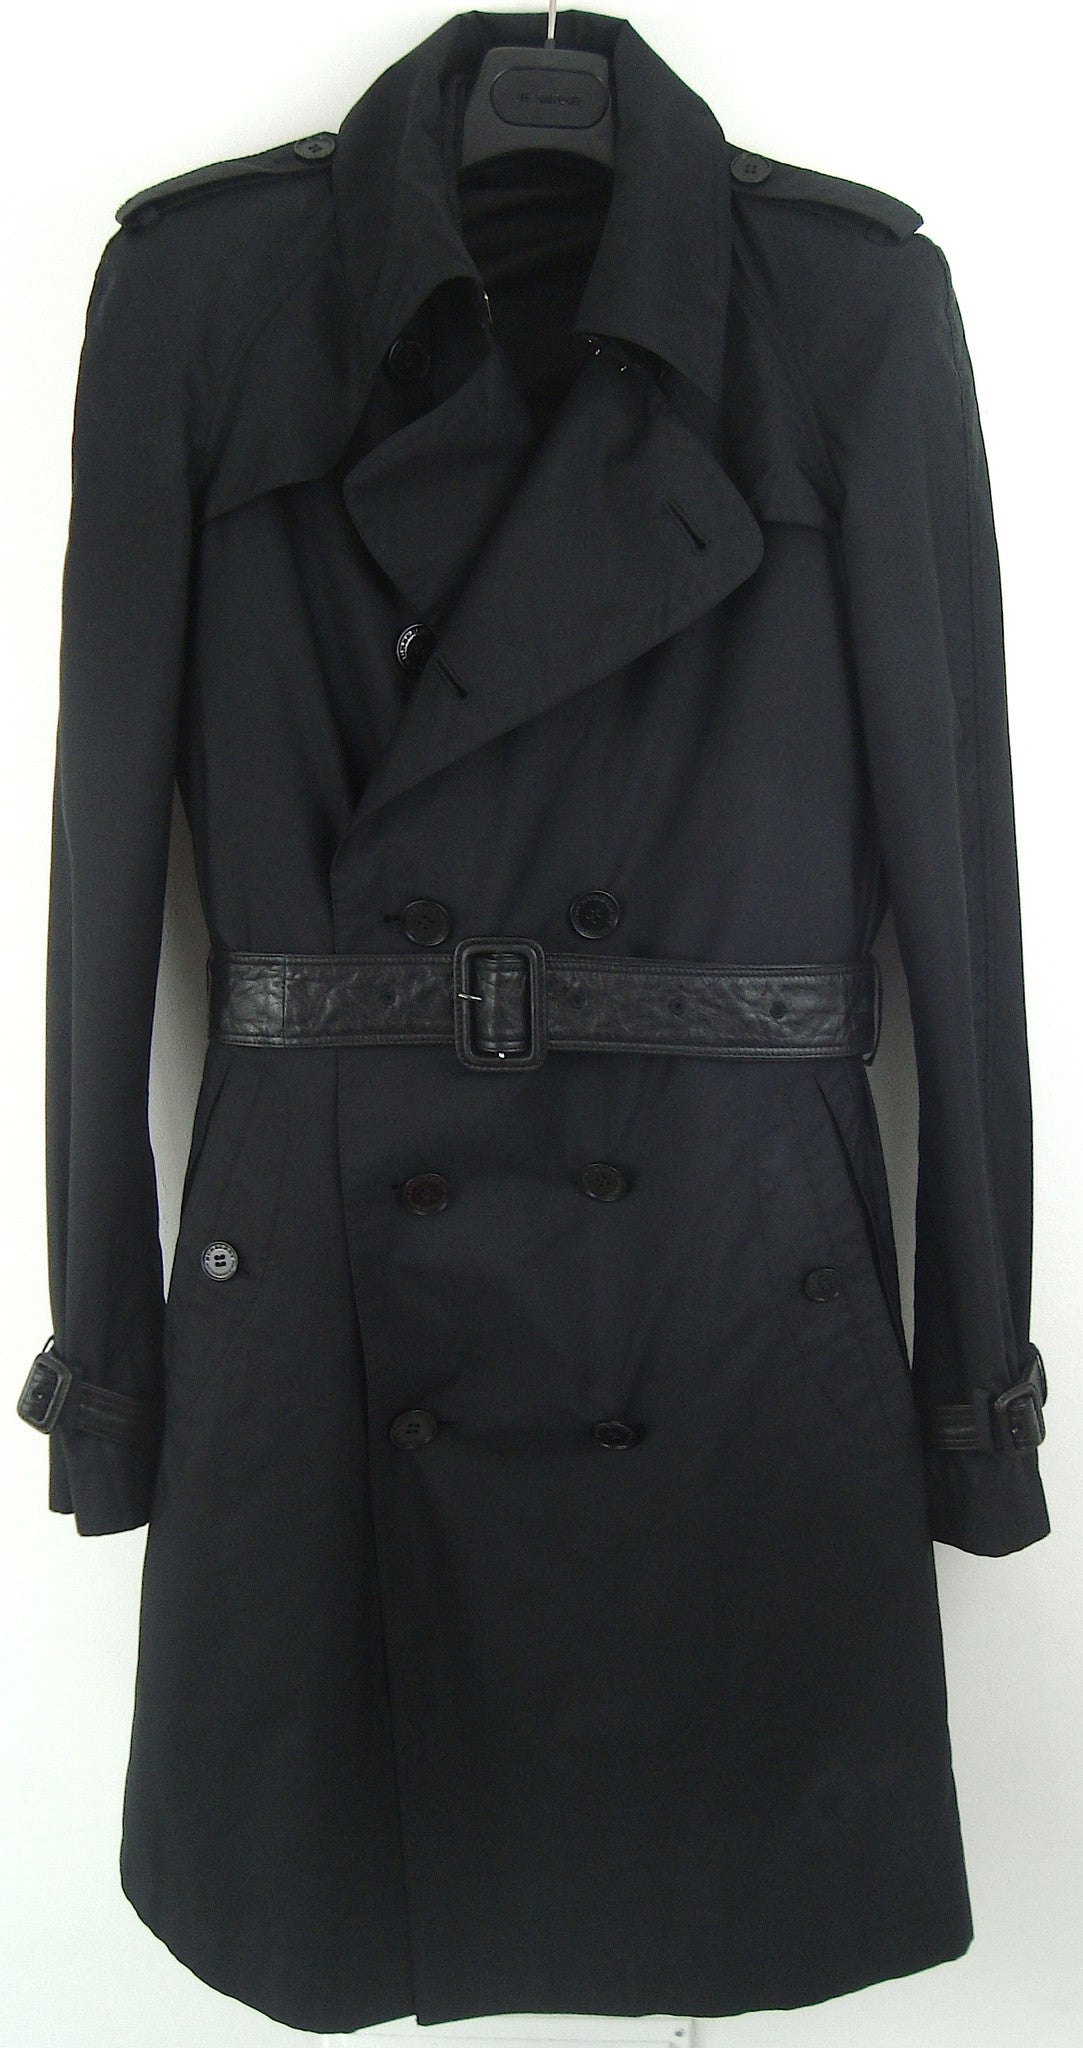 2008 Silk Gabardine Trench Coat with Leather details